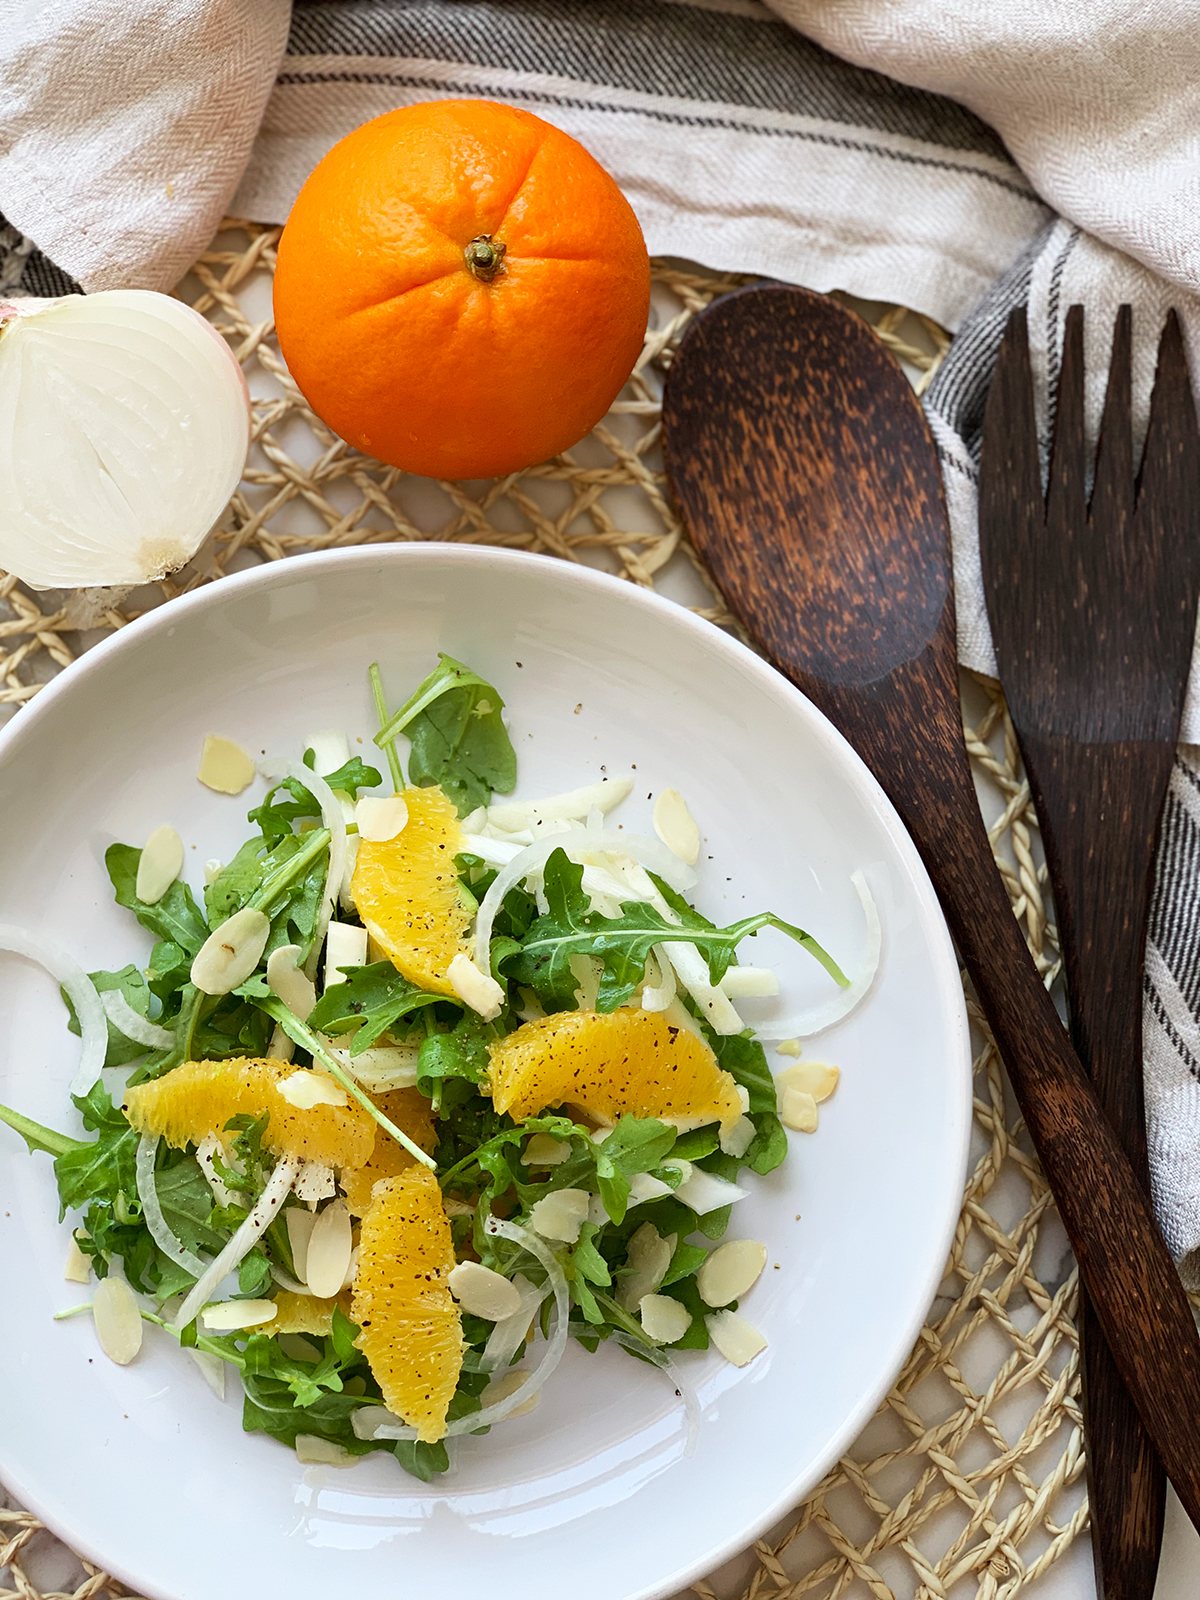 Orange and Fennel Salad (vegan recipe) served on a white plate with an orange, half onion and salad serving utensils in background